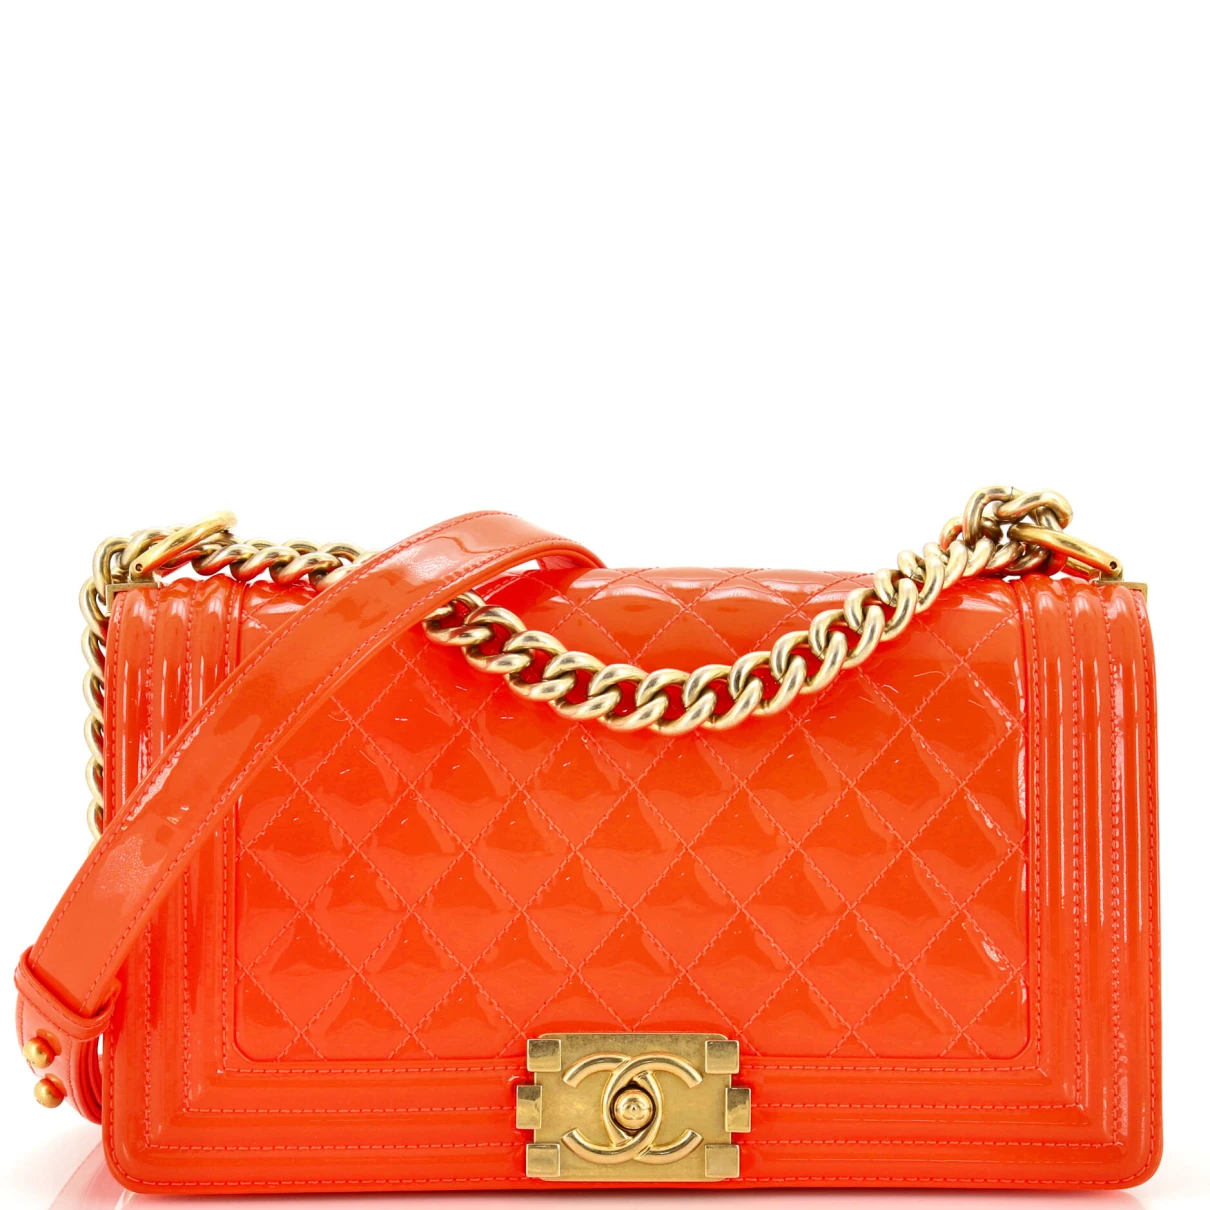 Pre-owned Chanel Patent Leather Handbag In Orange